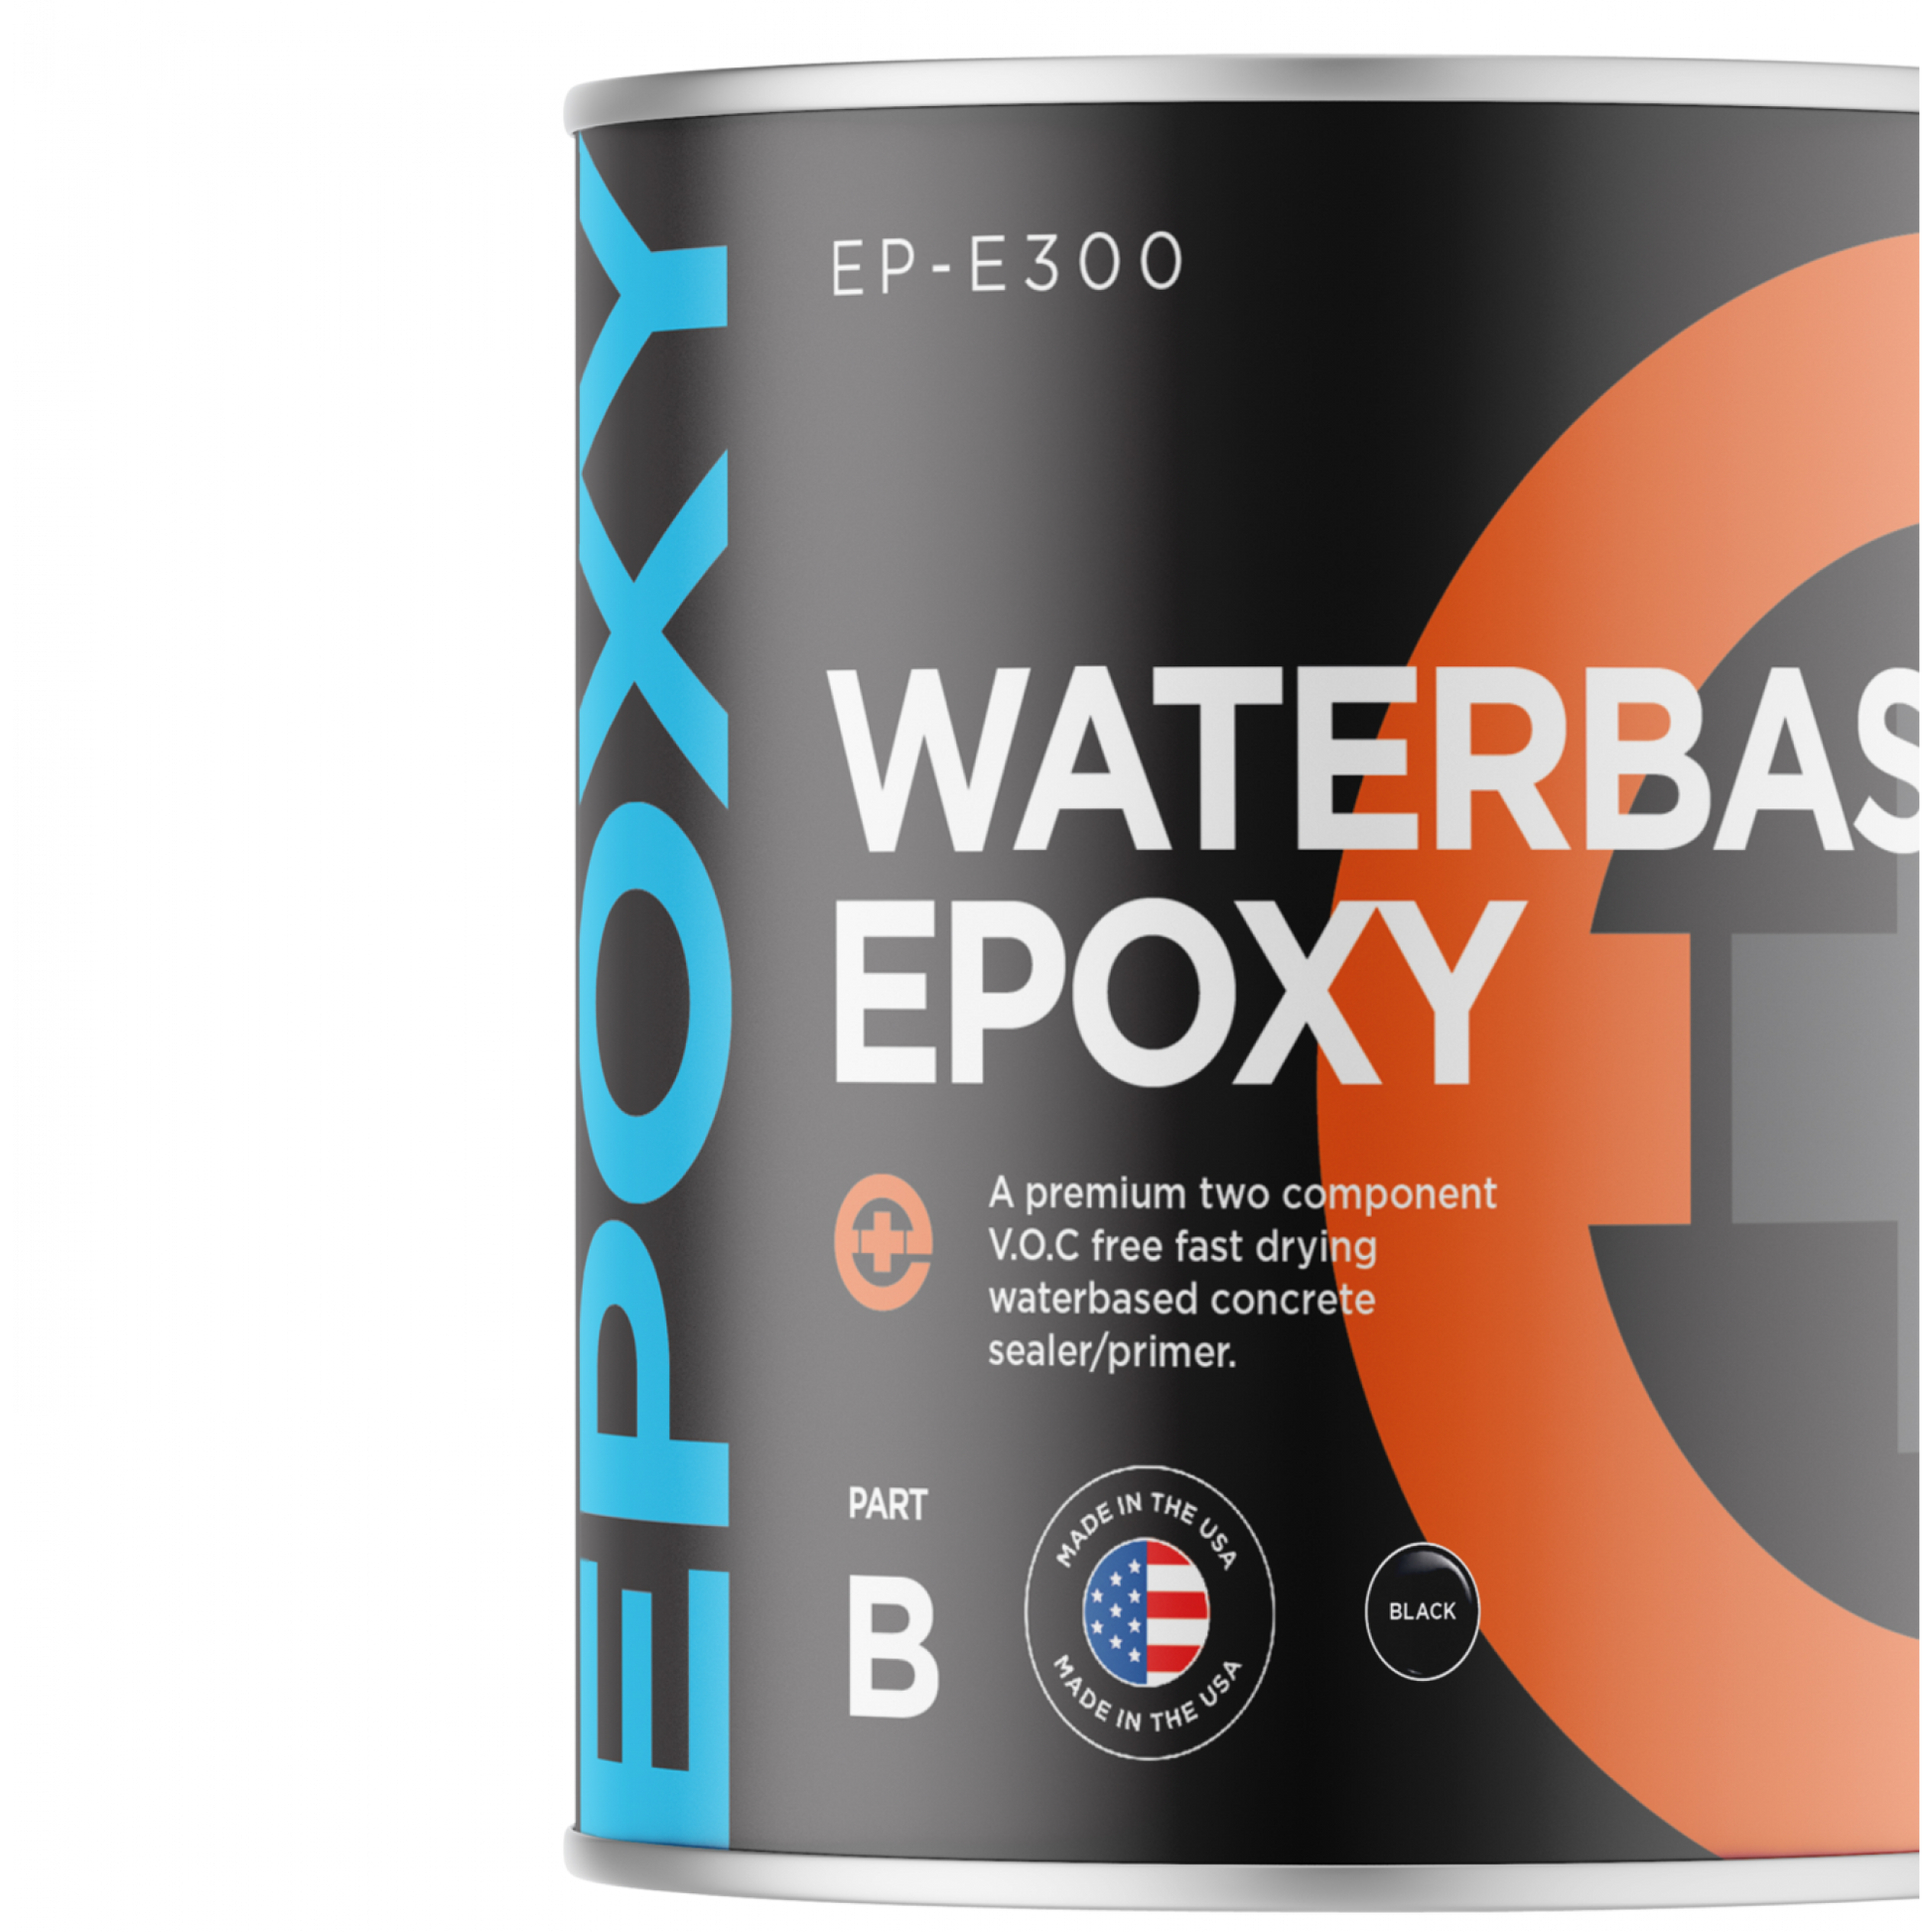 BLACK WATER-BASED EPOXY - 5-Gallon Kit, Ideal for Spacious Surface Projects